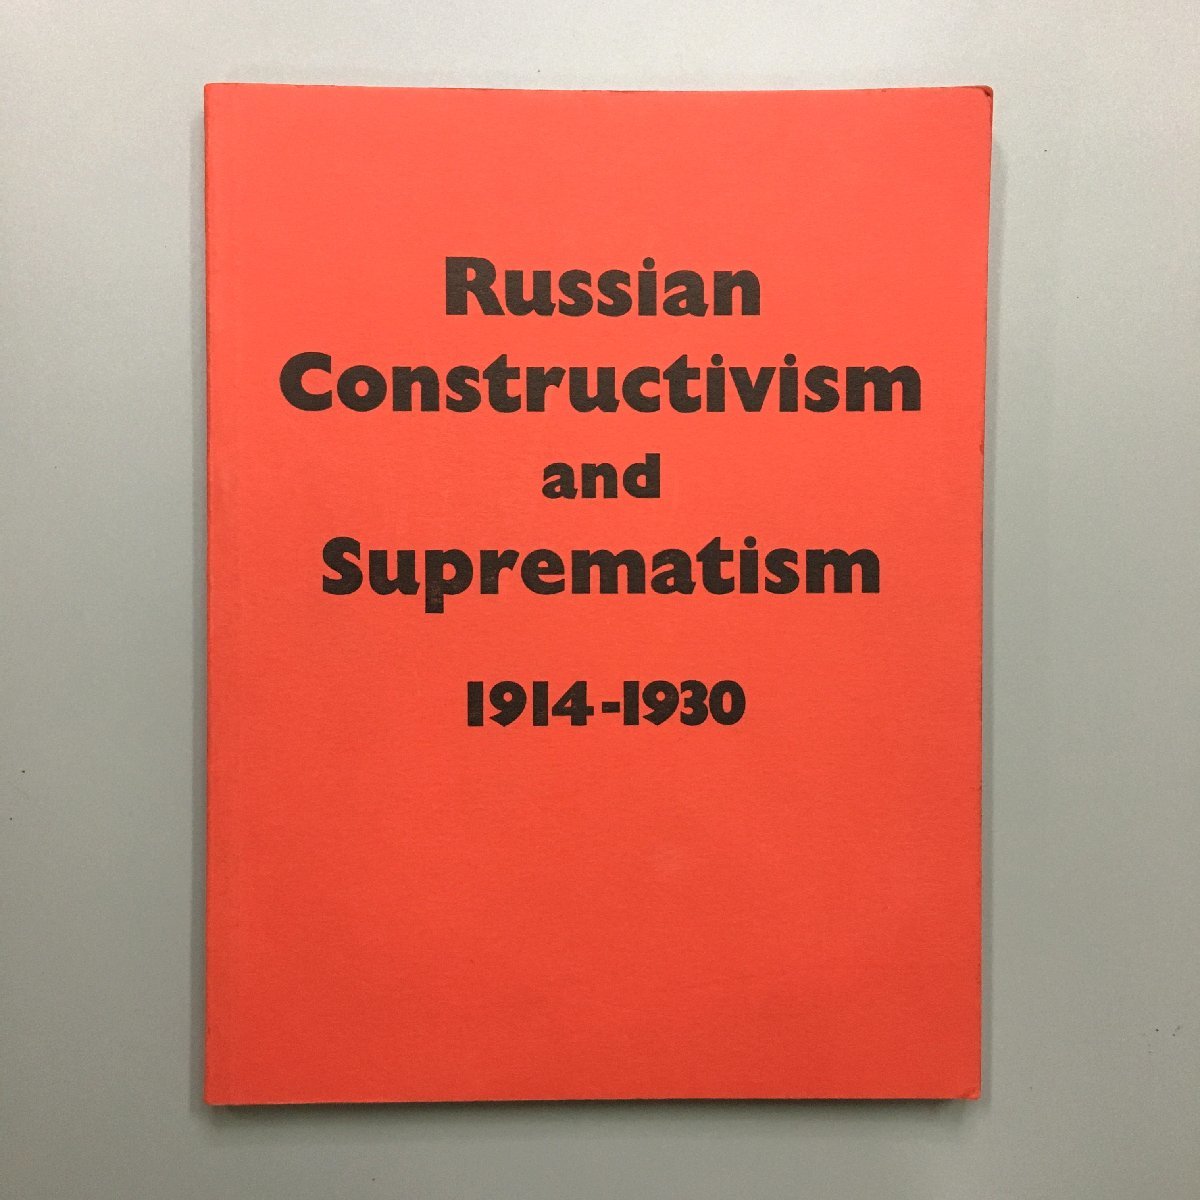 RUSSIAN CONSTRUCTIVISM AND SUPREMATISM 1914-1930 Exhibition Catalog of Russian Constructivism and Suprematism, Catalog, Art Book, Collection of Works, Foreign Books, Painting, Art Book, Collection, Art Book